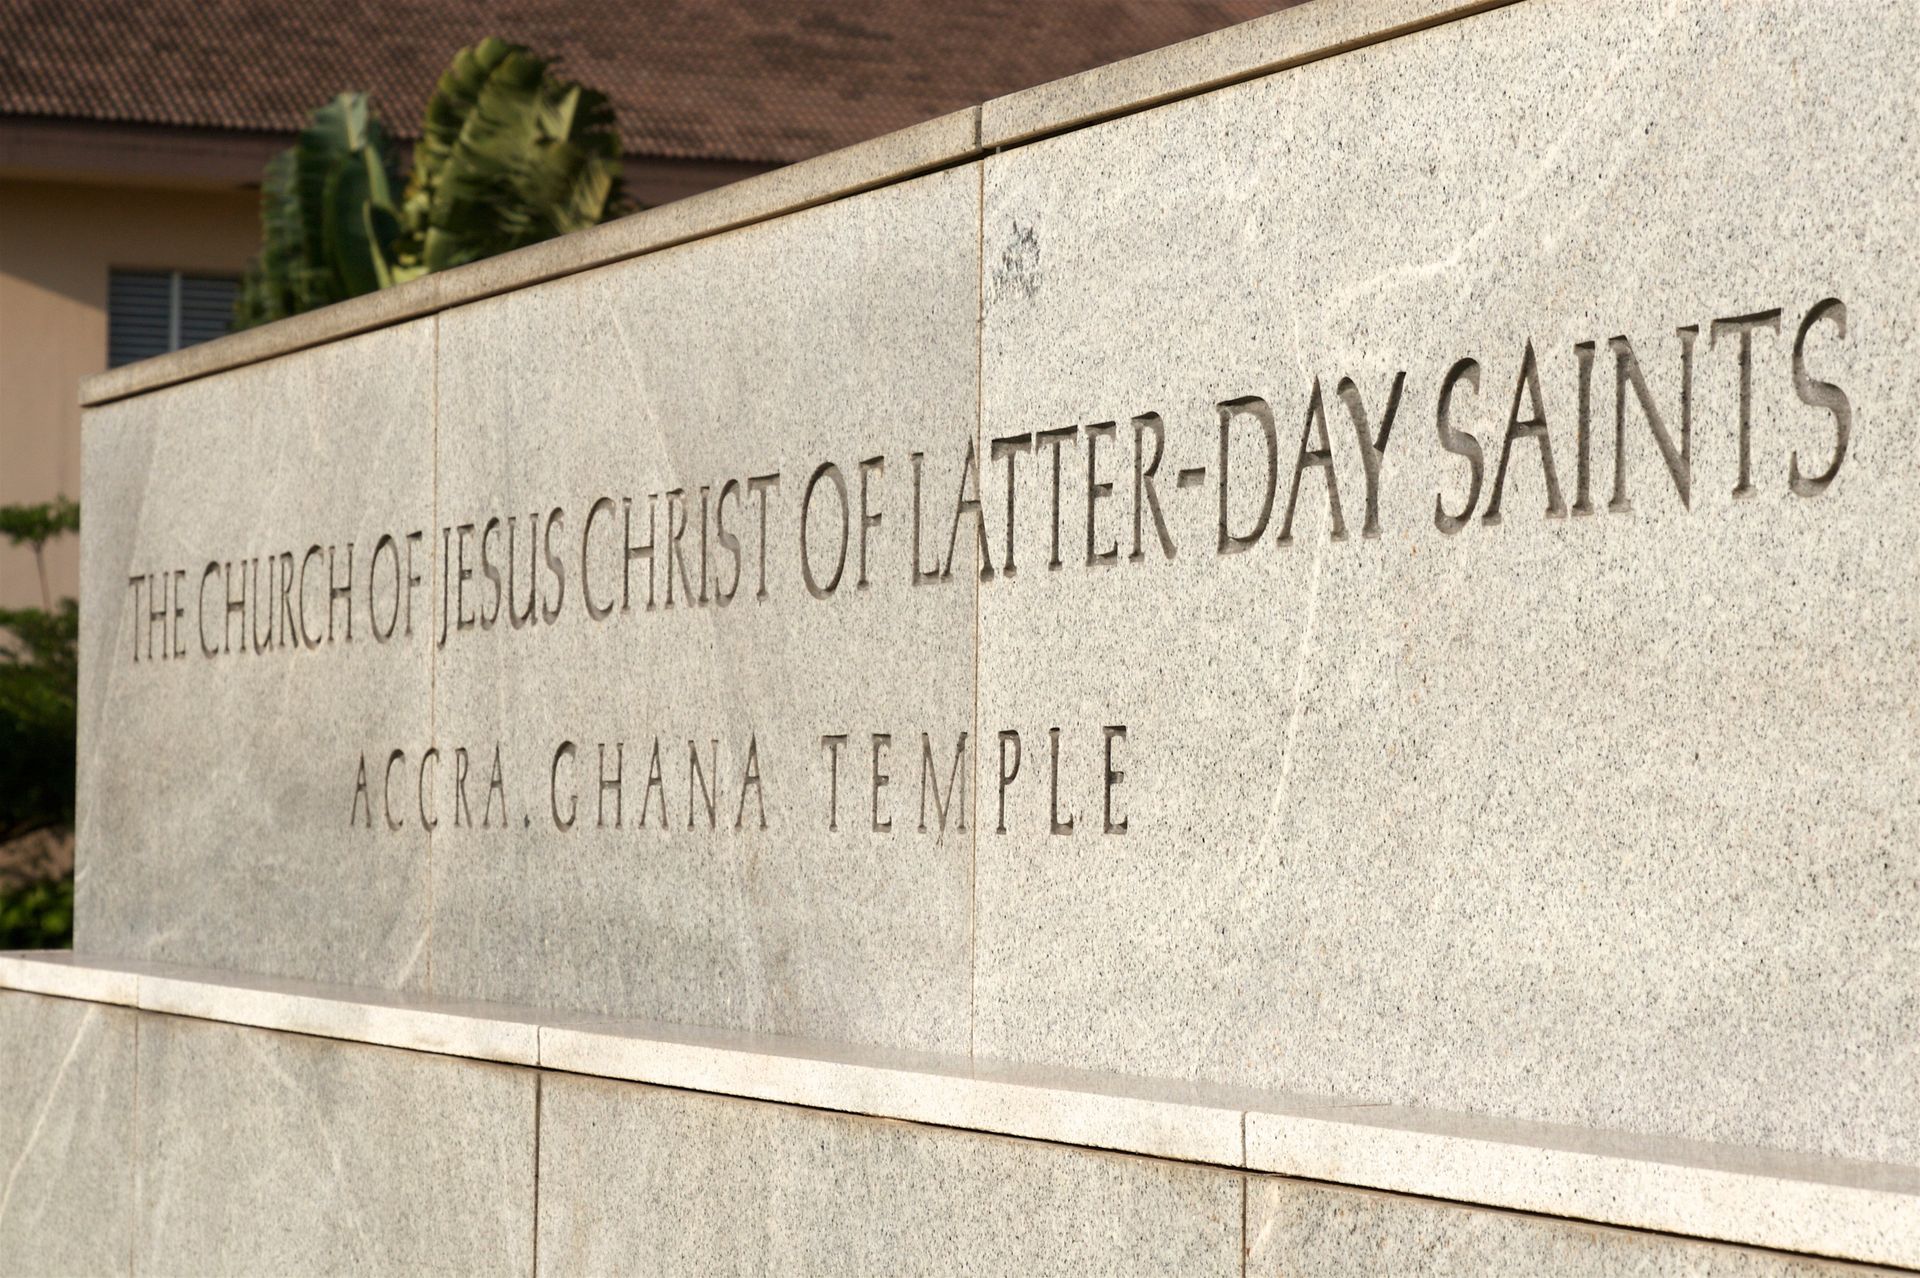 The temple name sign greets members as they come to the Accra Ghana Temple.